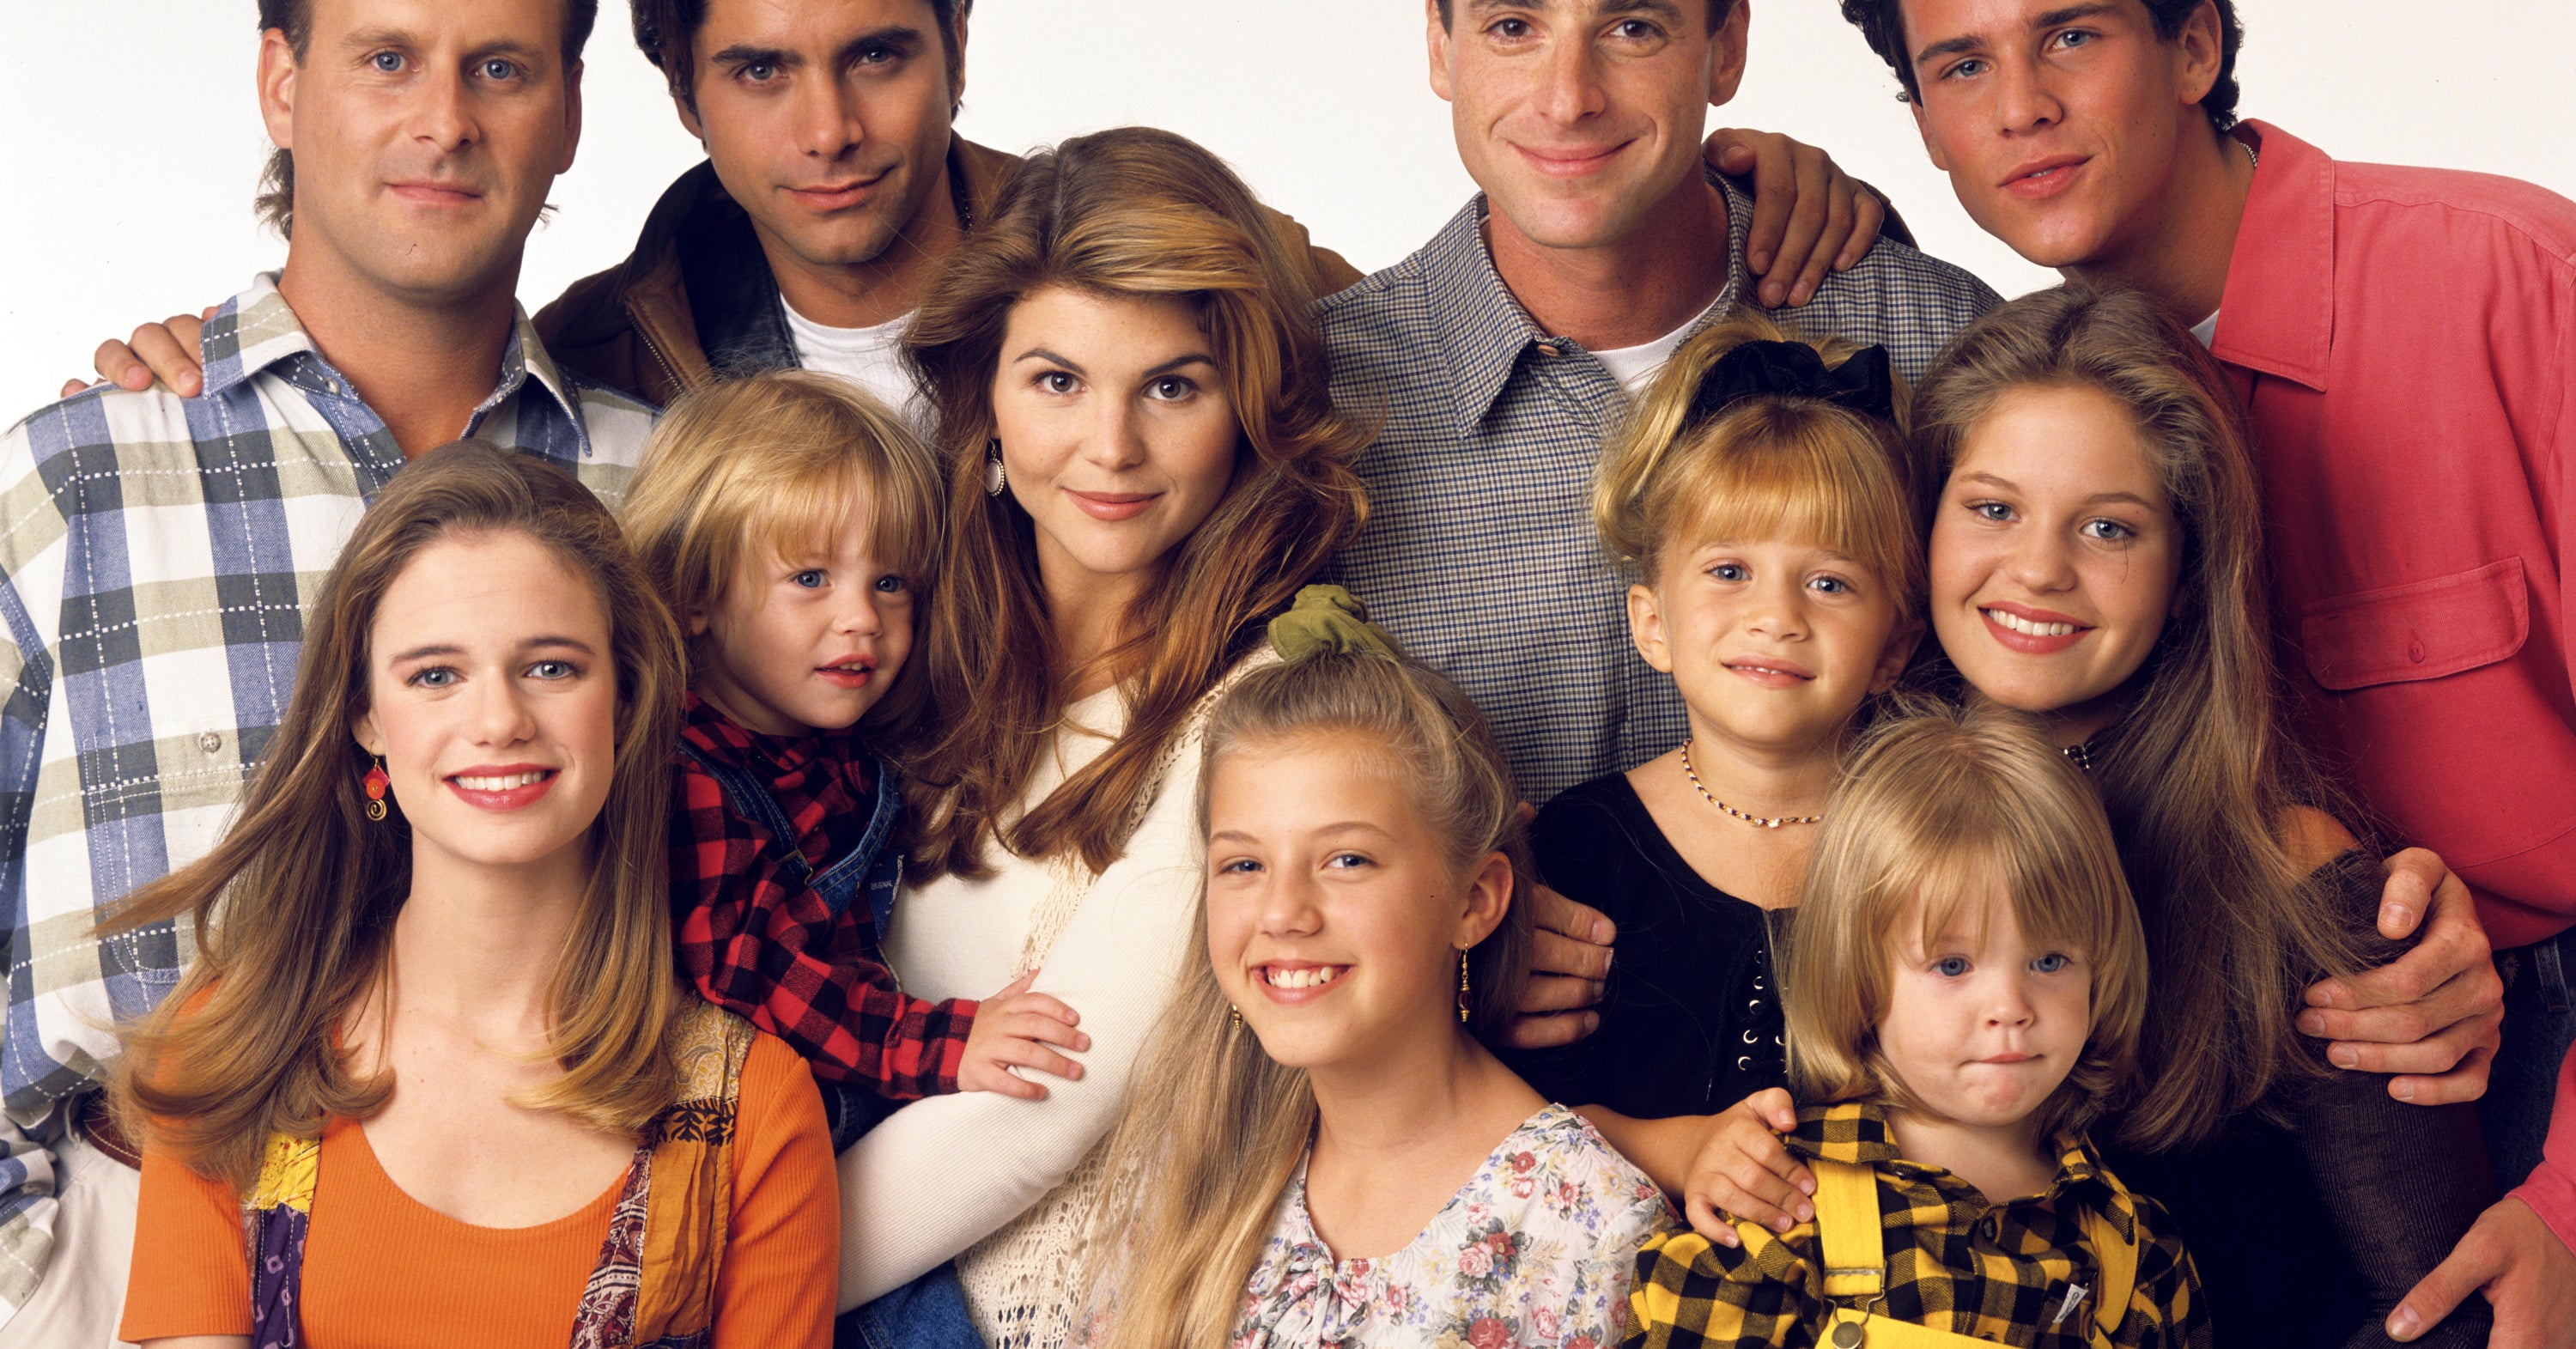 The "Full House" Cast Finally Reunited With Mary-Kate And Ashley Olsen, And The Photo Will Warm Your Heart